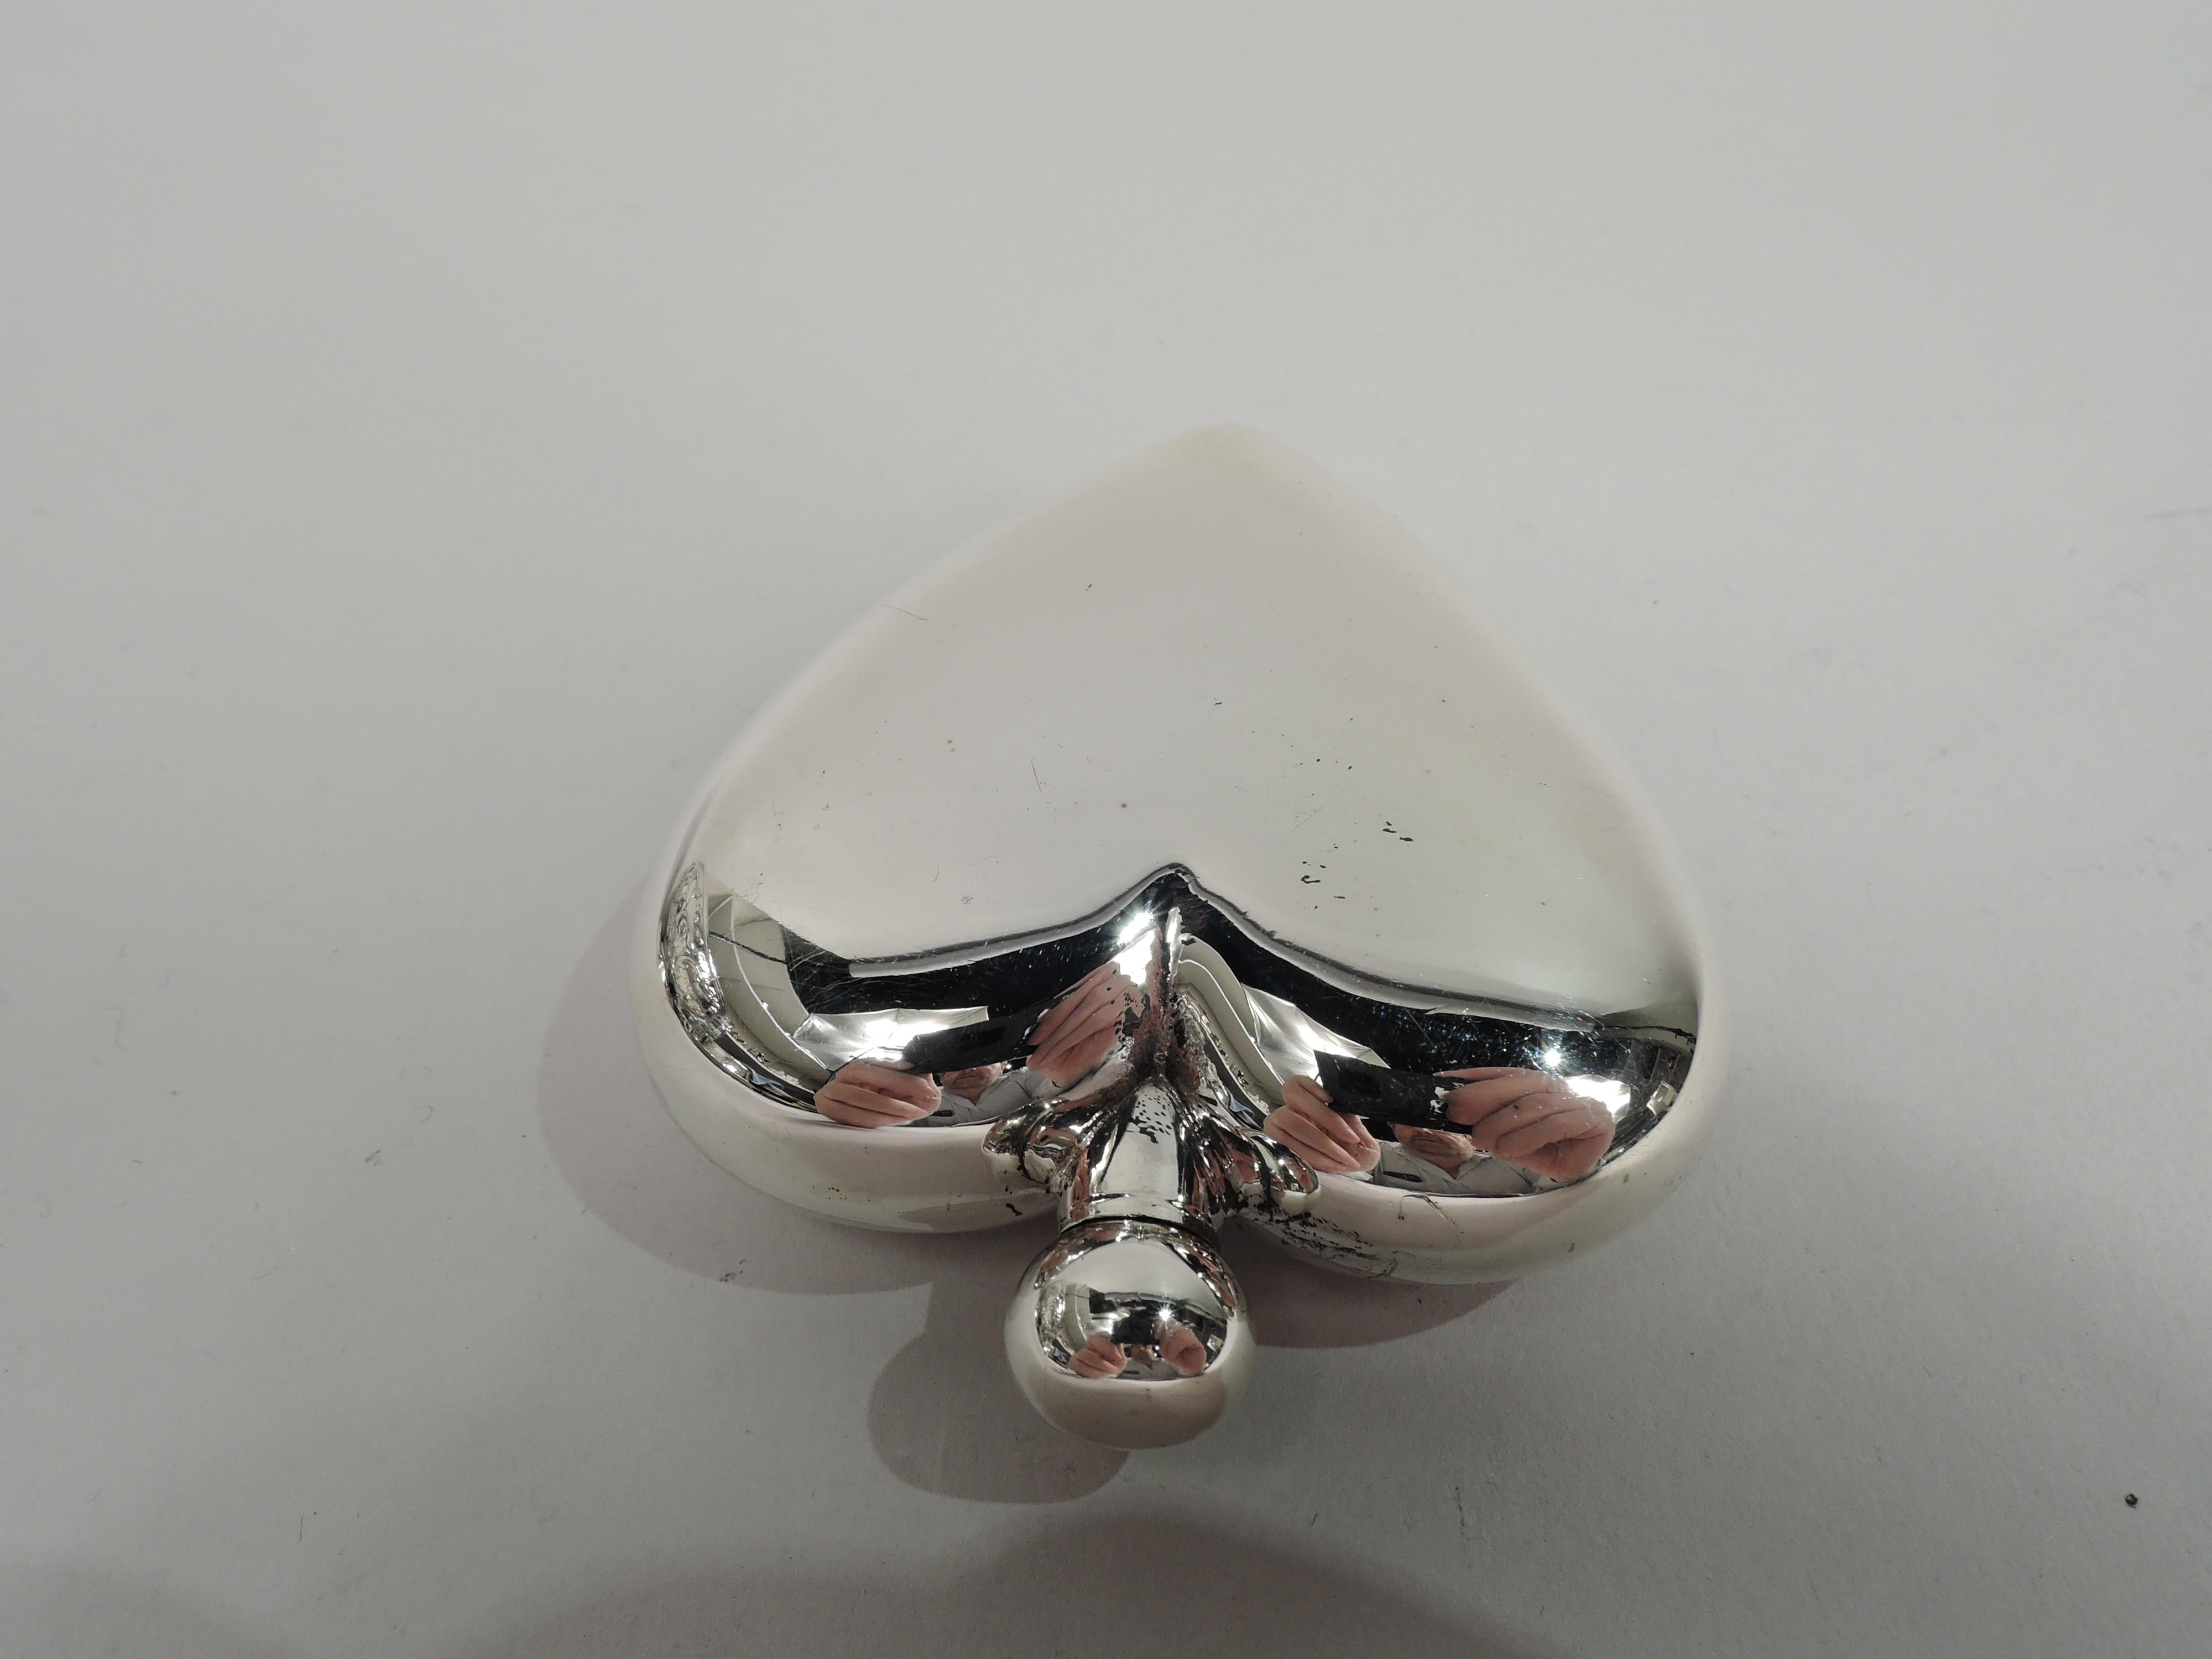 Old-fashioned English sterling silver perfume, 1993. Heart shaped. Threaded ball cover with corkscrew daub. Sweet and romantic. Fully marked including Penhaligon’s retailer’s mark and Birmingham assay stamp. Weight: 2 troy ounces.